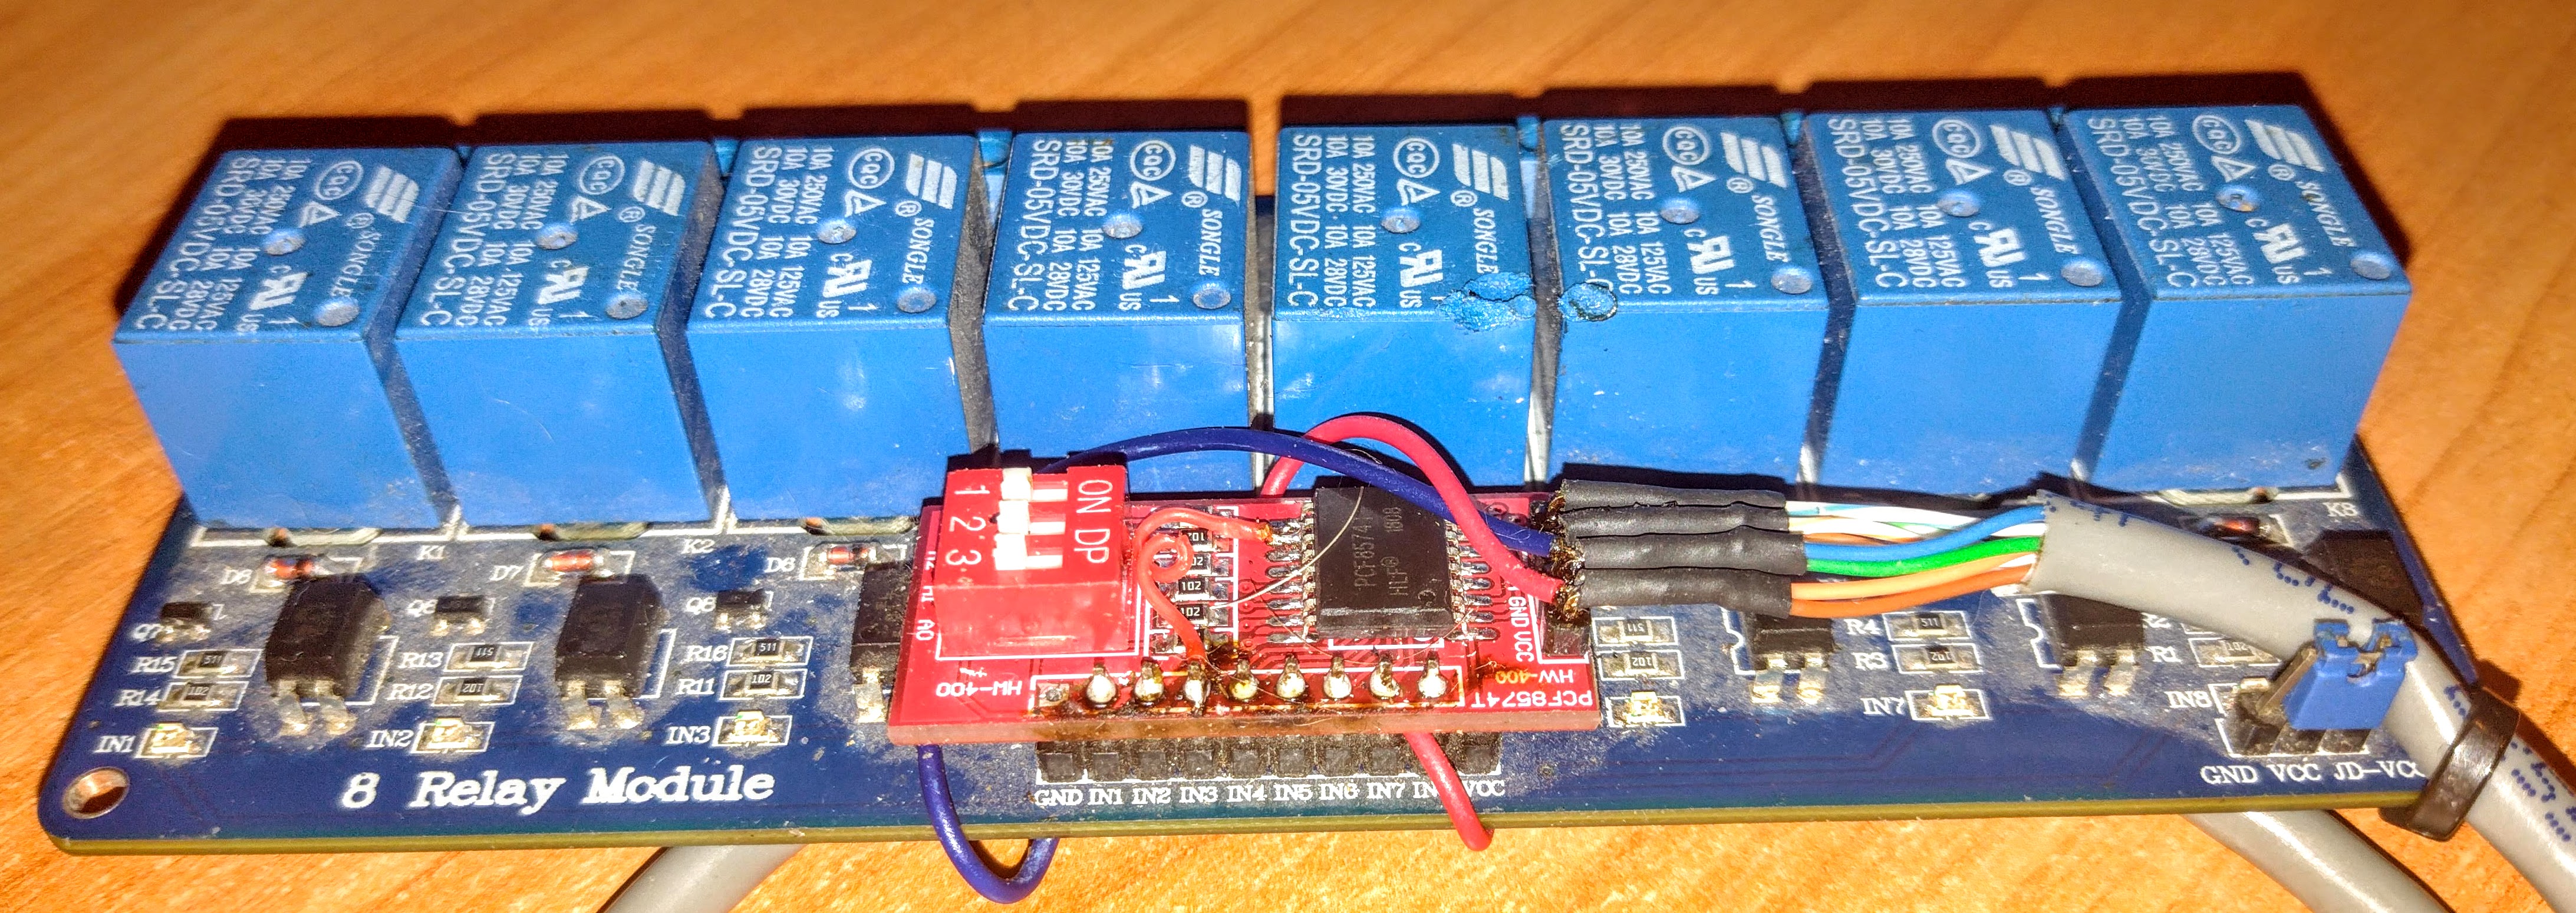 Module of 8 relays with soldered PCF8574